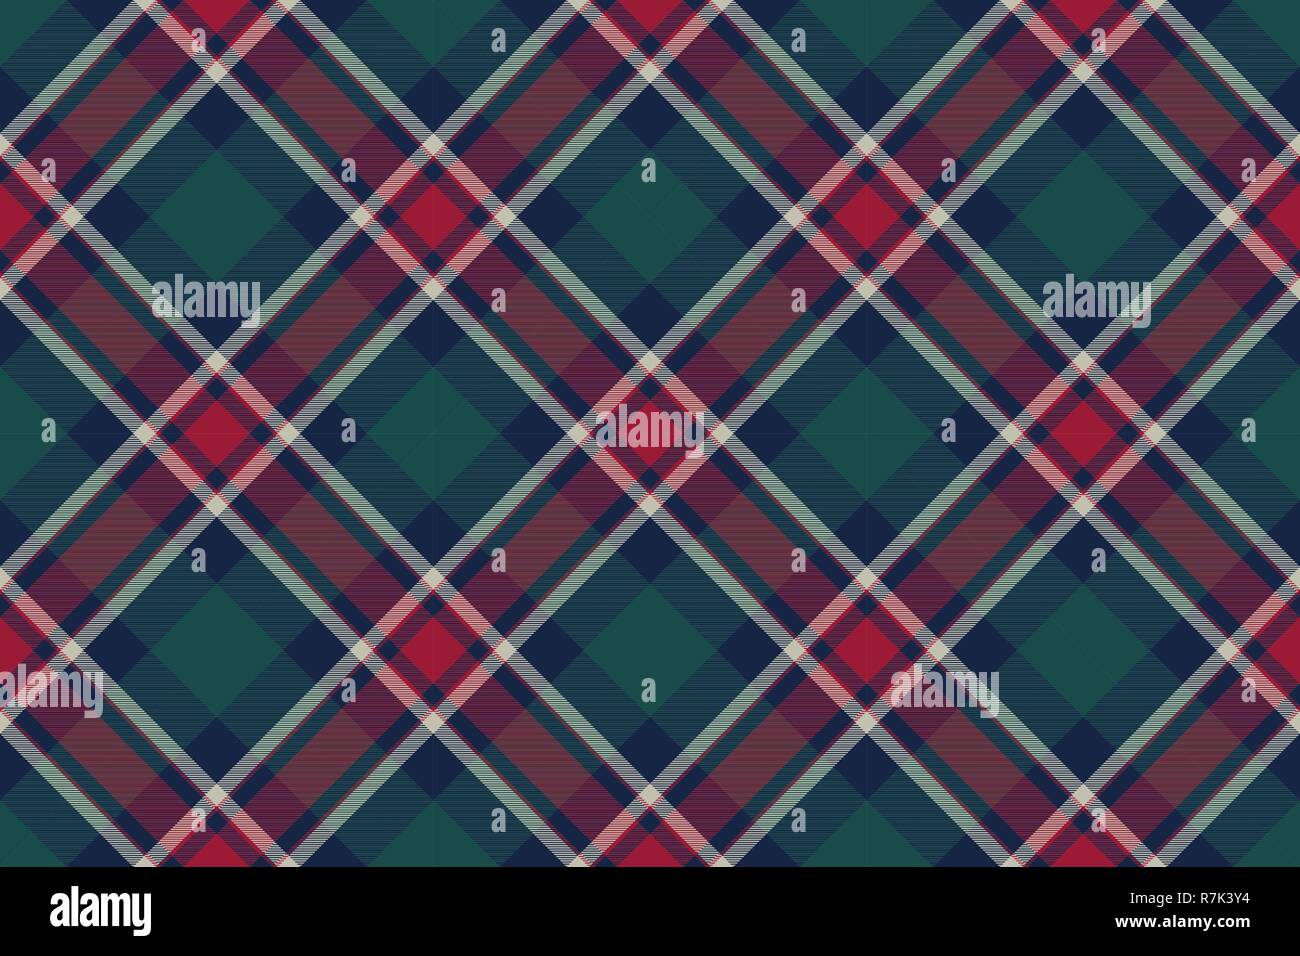 Tartan plaid pattern in green and red. Print fabric texture seamless ...